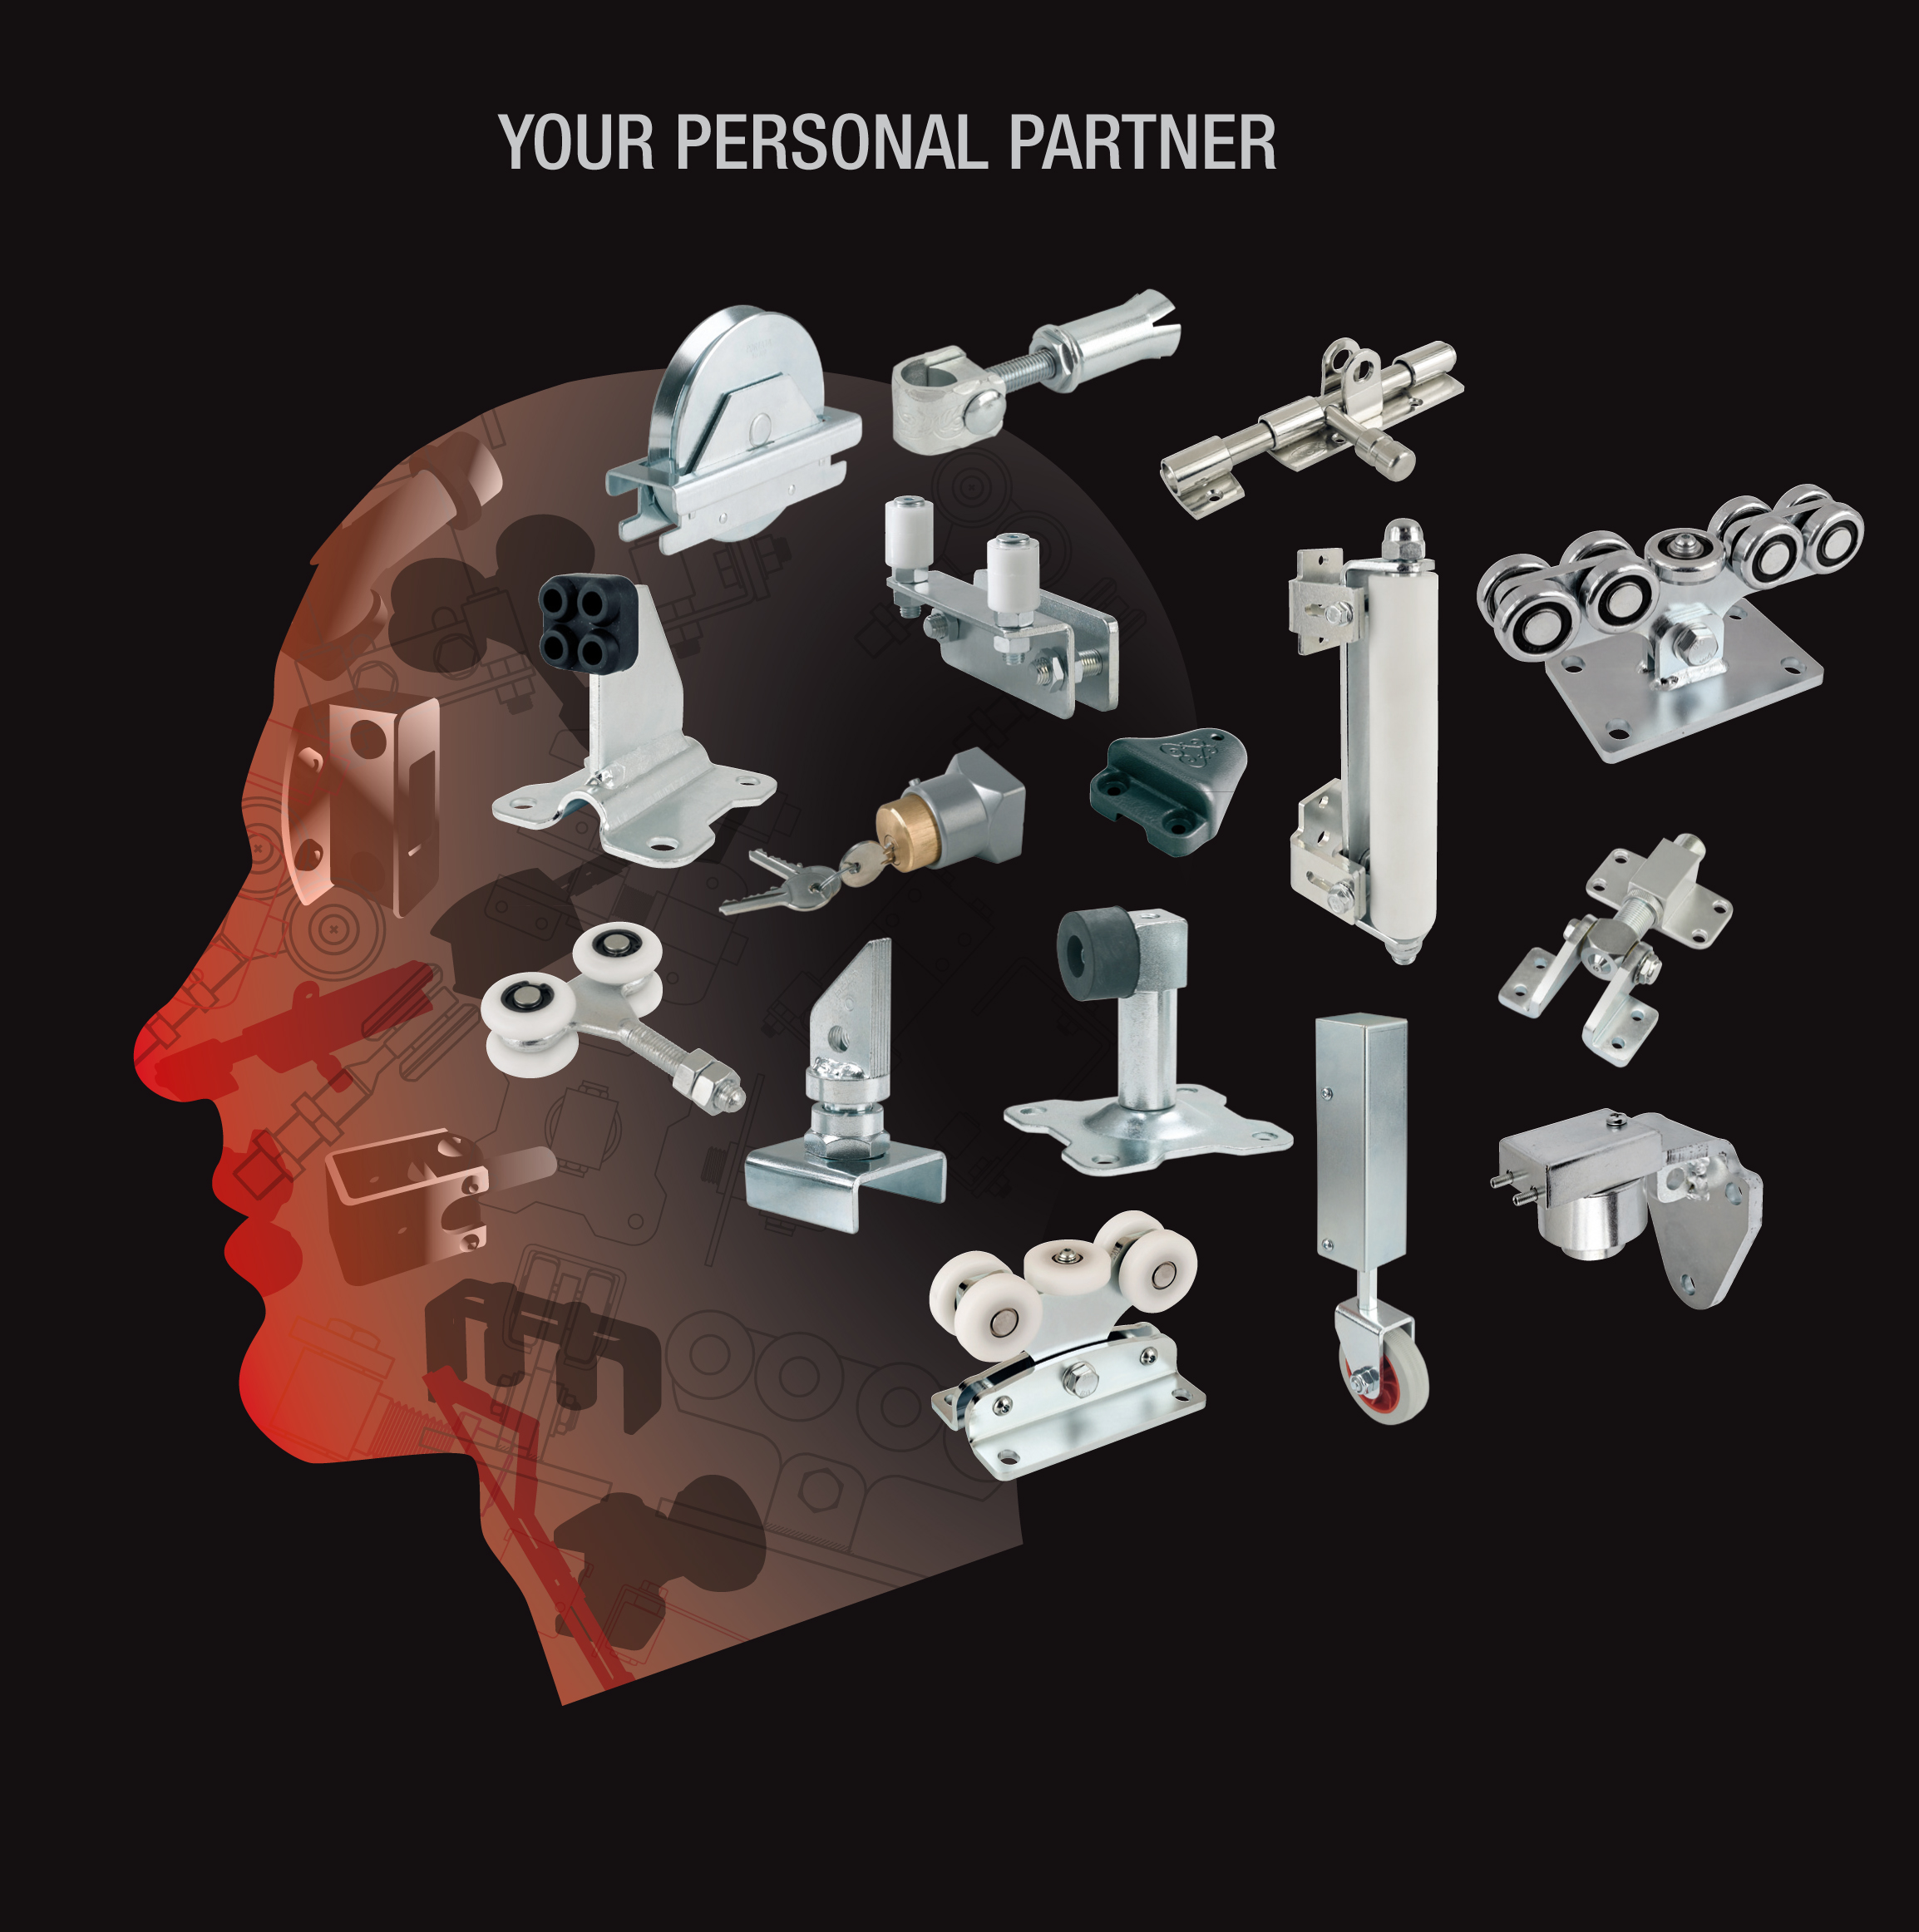 Your Personal Partner